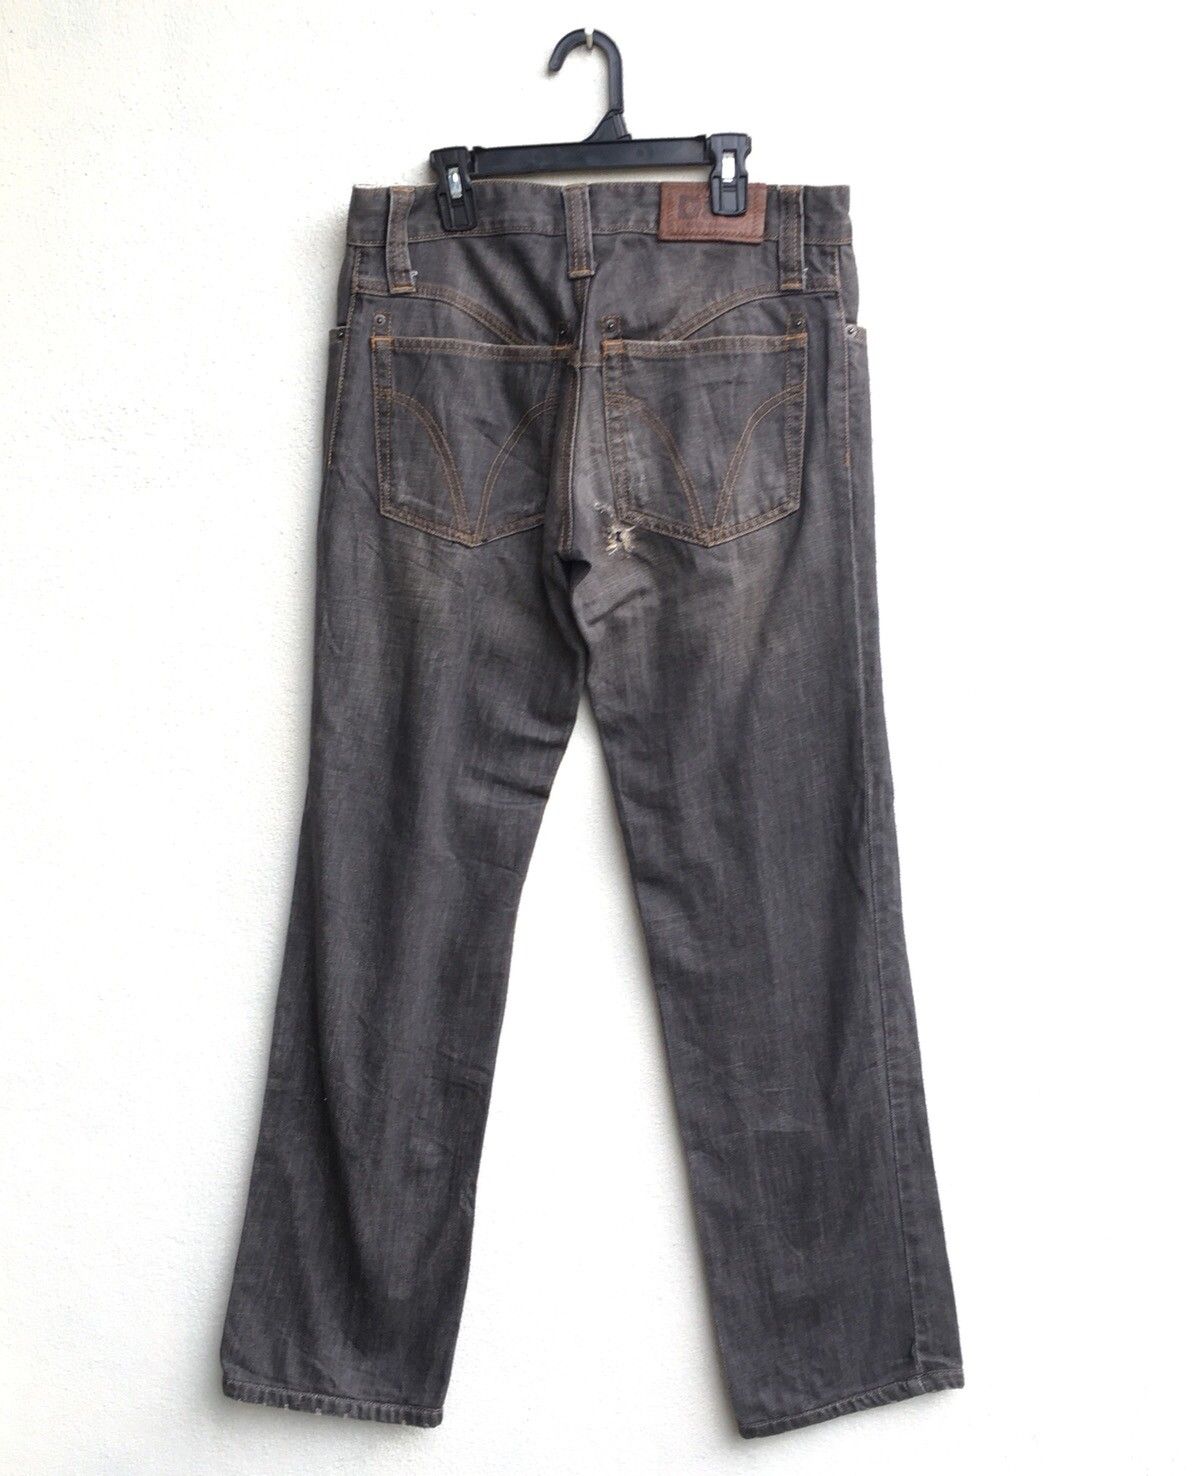 D&G FW05/06 Distressed Jeans - 1